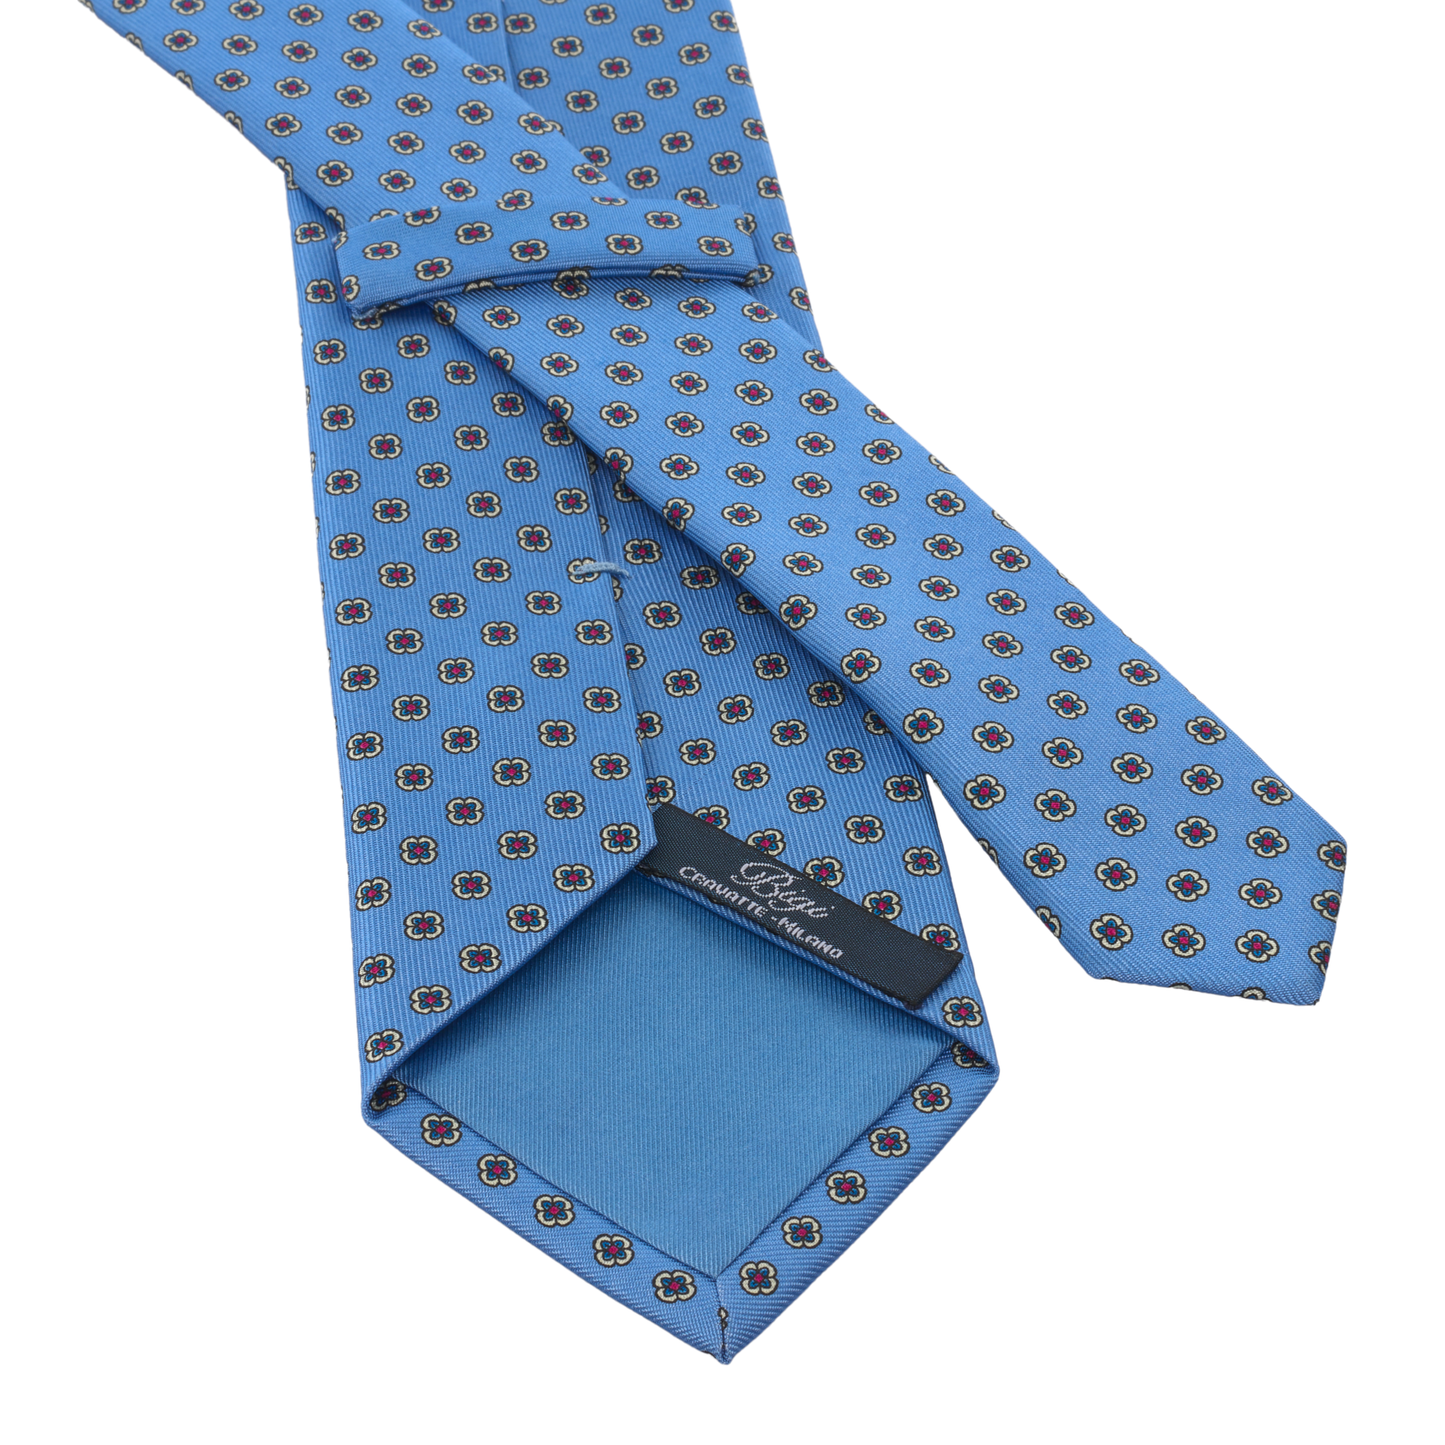 Woven Silk Lined Tie with Blue Flower Design